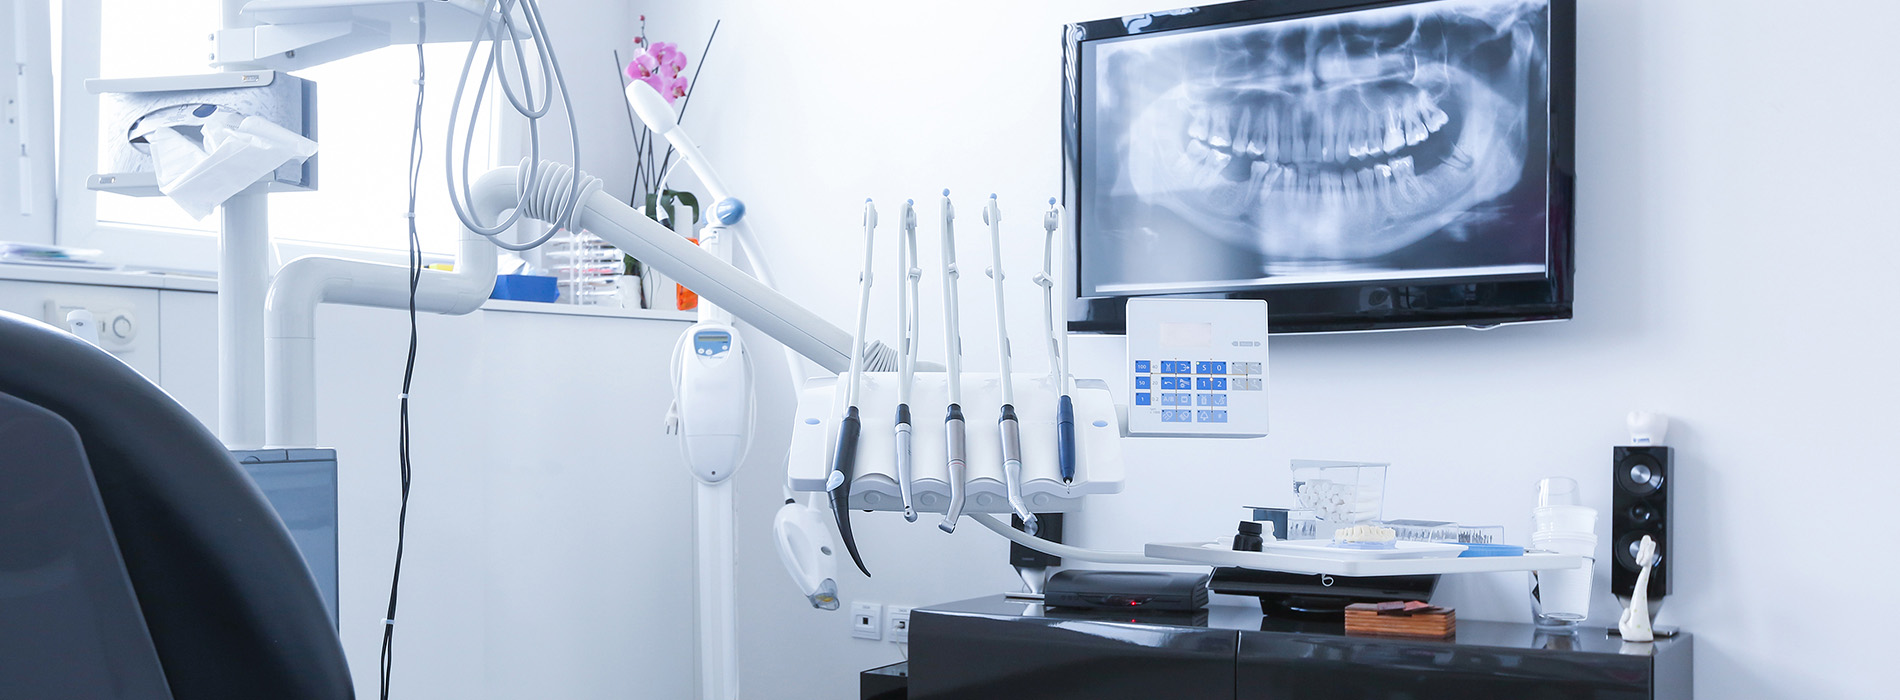 The image shows a modern dental office with a clean, white interior, featuring a dental chair and equipment, such as a monitor displaying an X-ray of a mouth, a dental light, and various other dental tools.